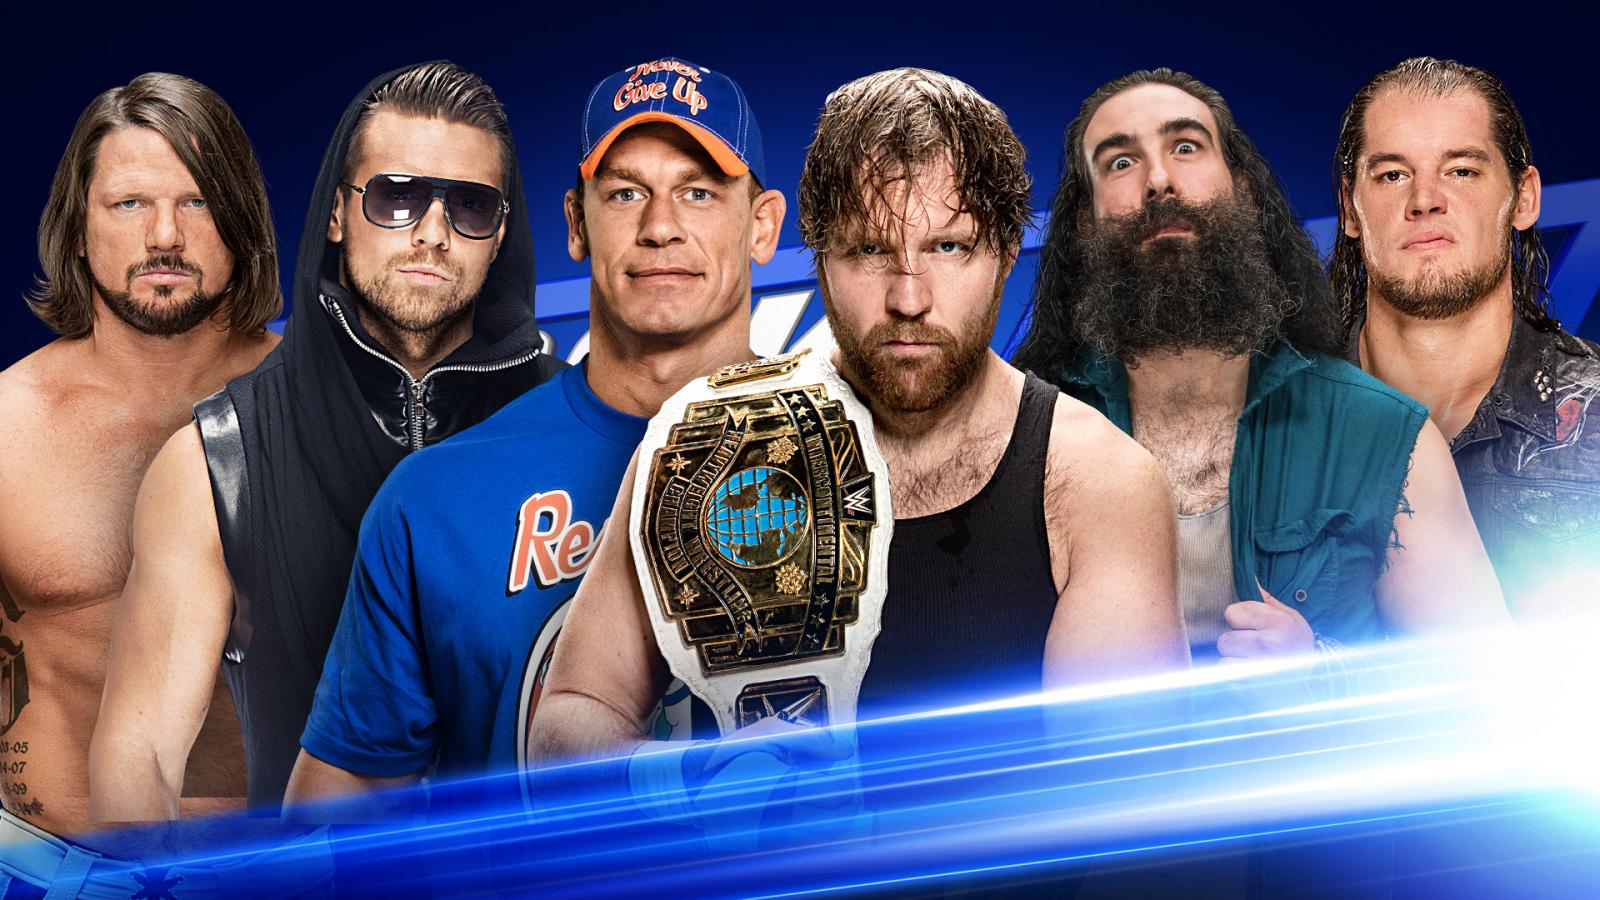 WWE SmackDown Stars Competing for WrestleMania 33 Title Match Set